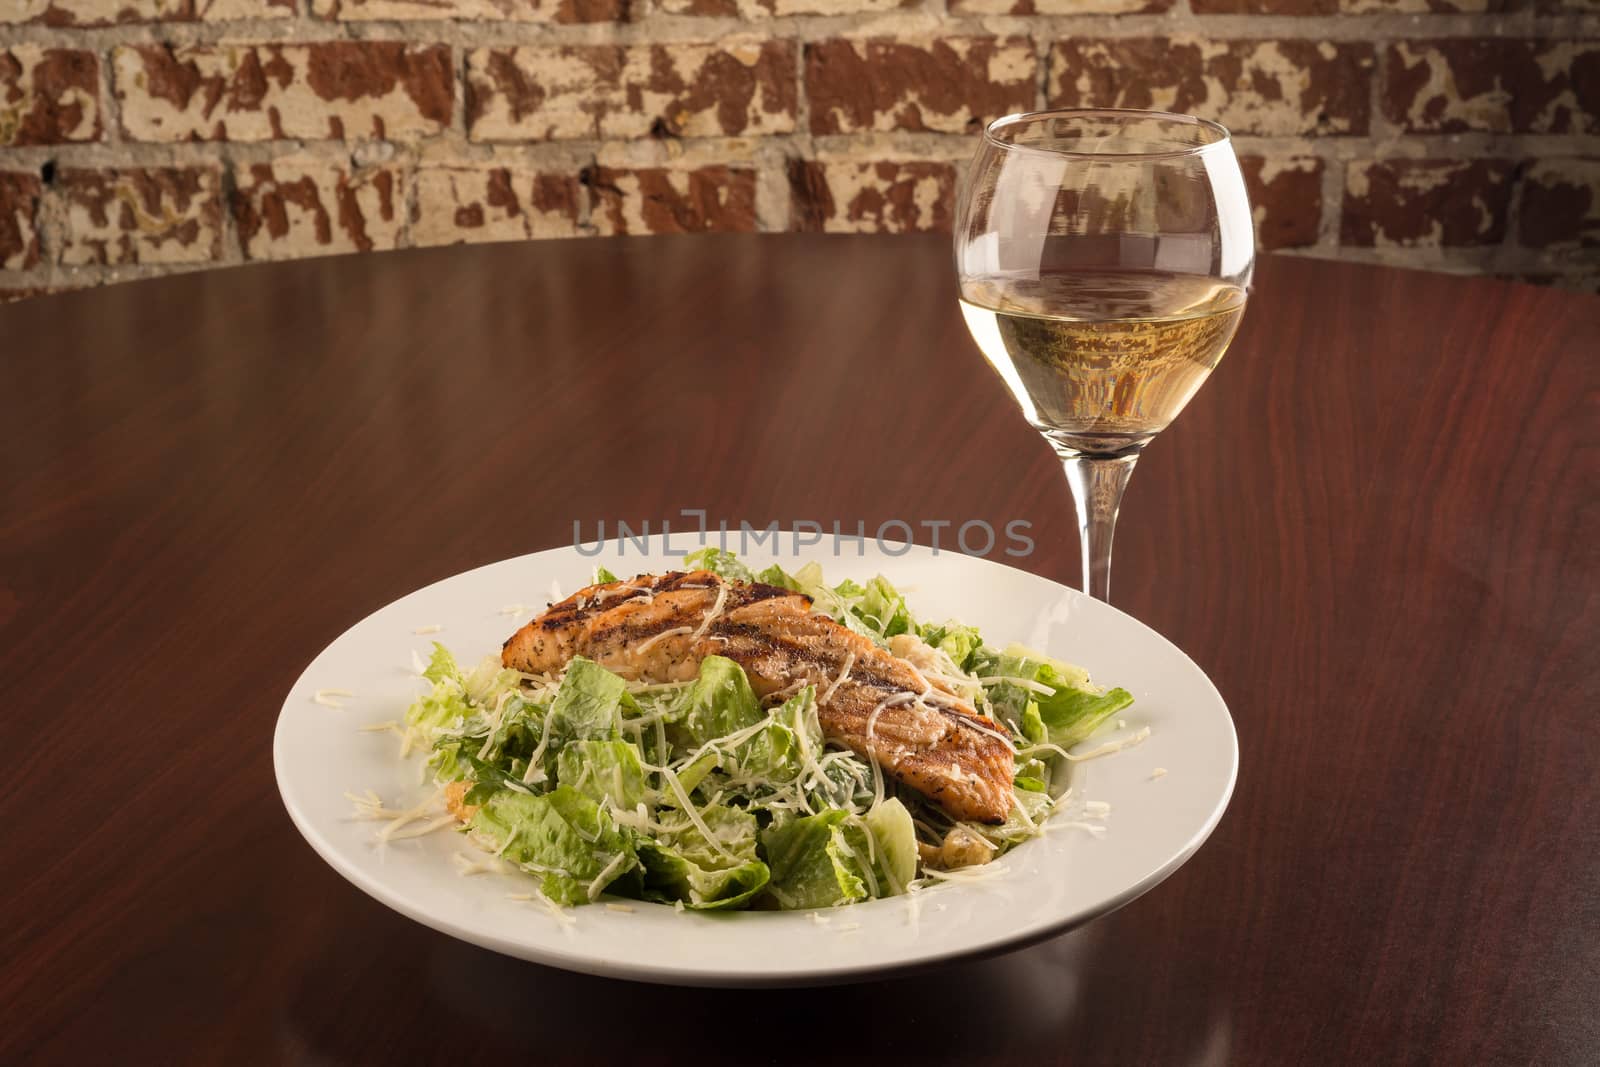 Grilled Chicken Cesar Salad with a glass of Chardonnay by rockinelle